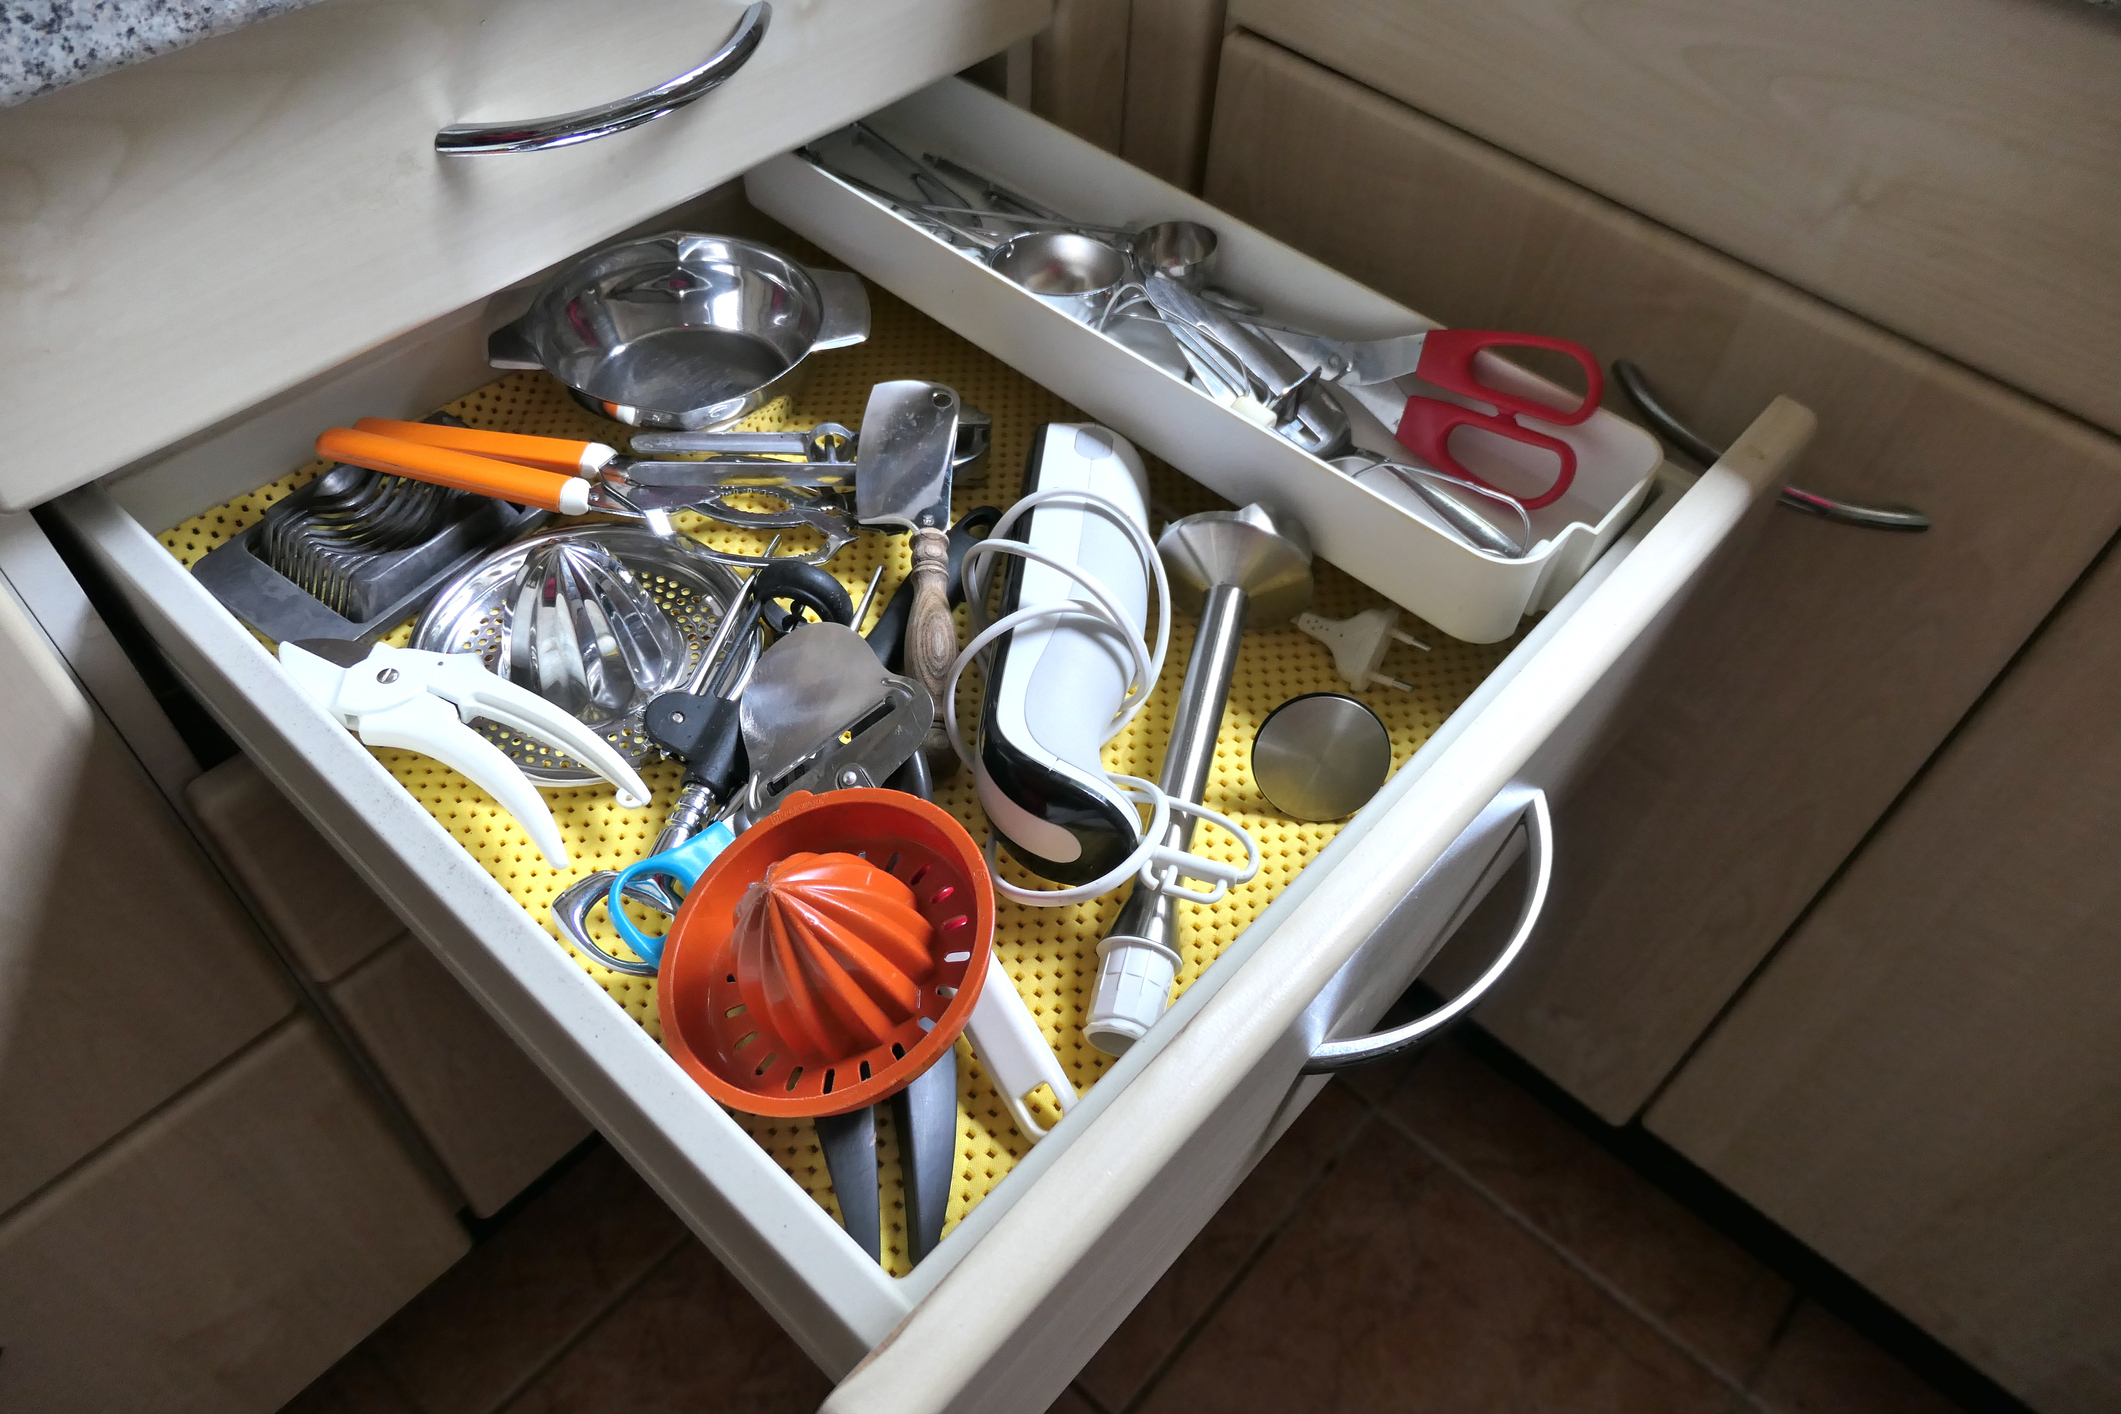 downsizing your kitchen items